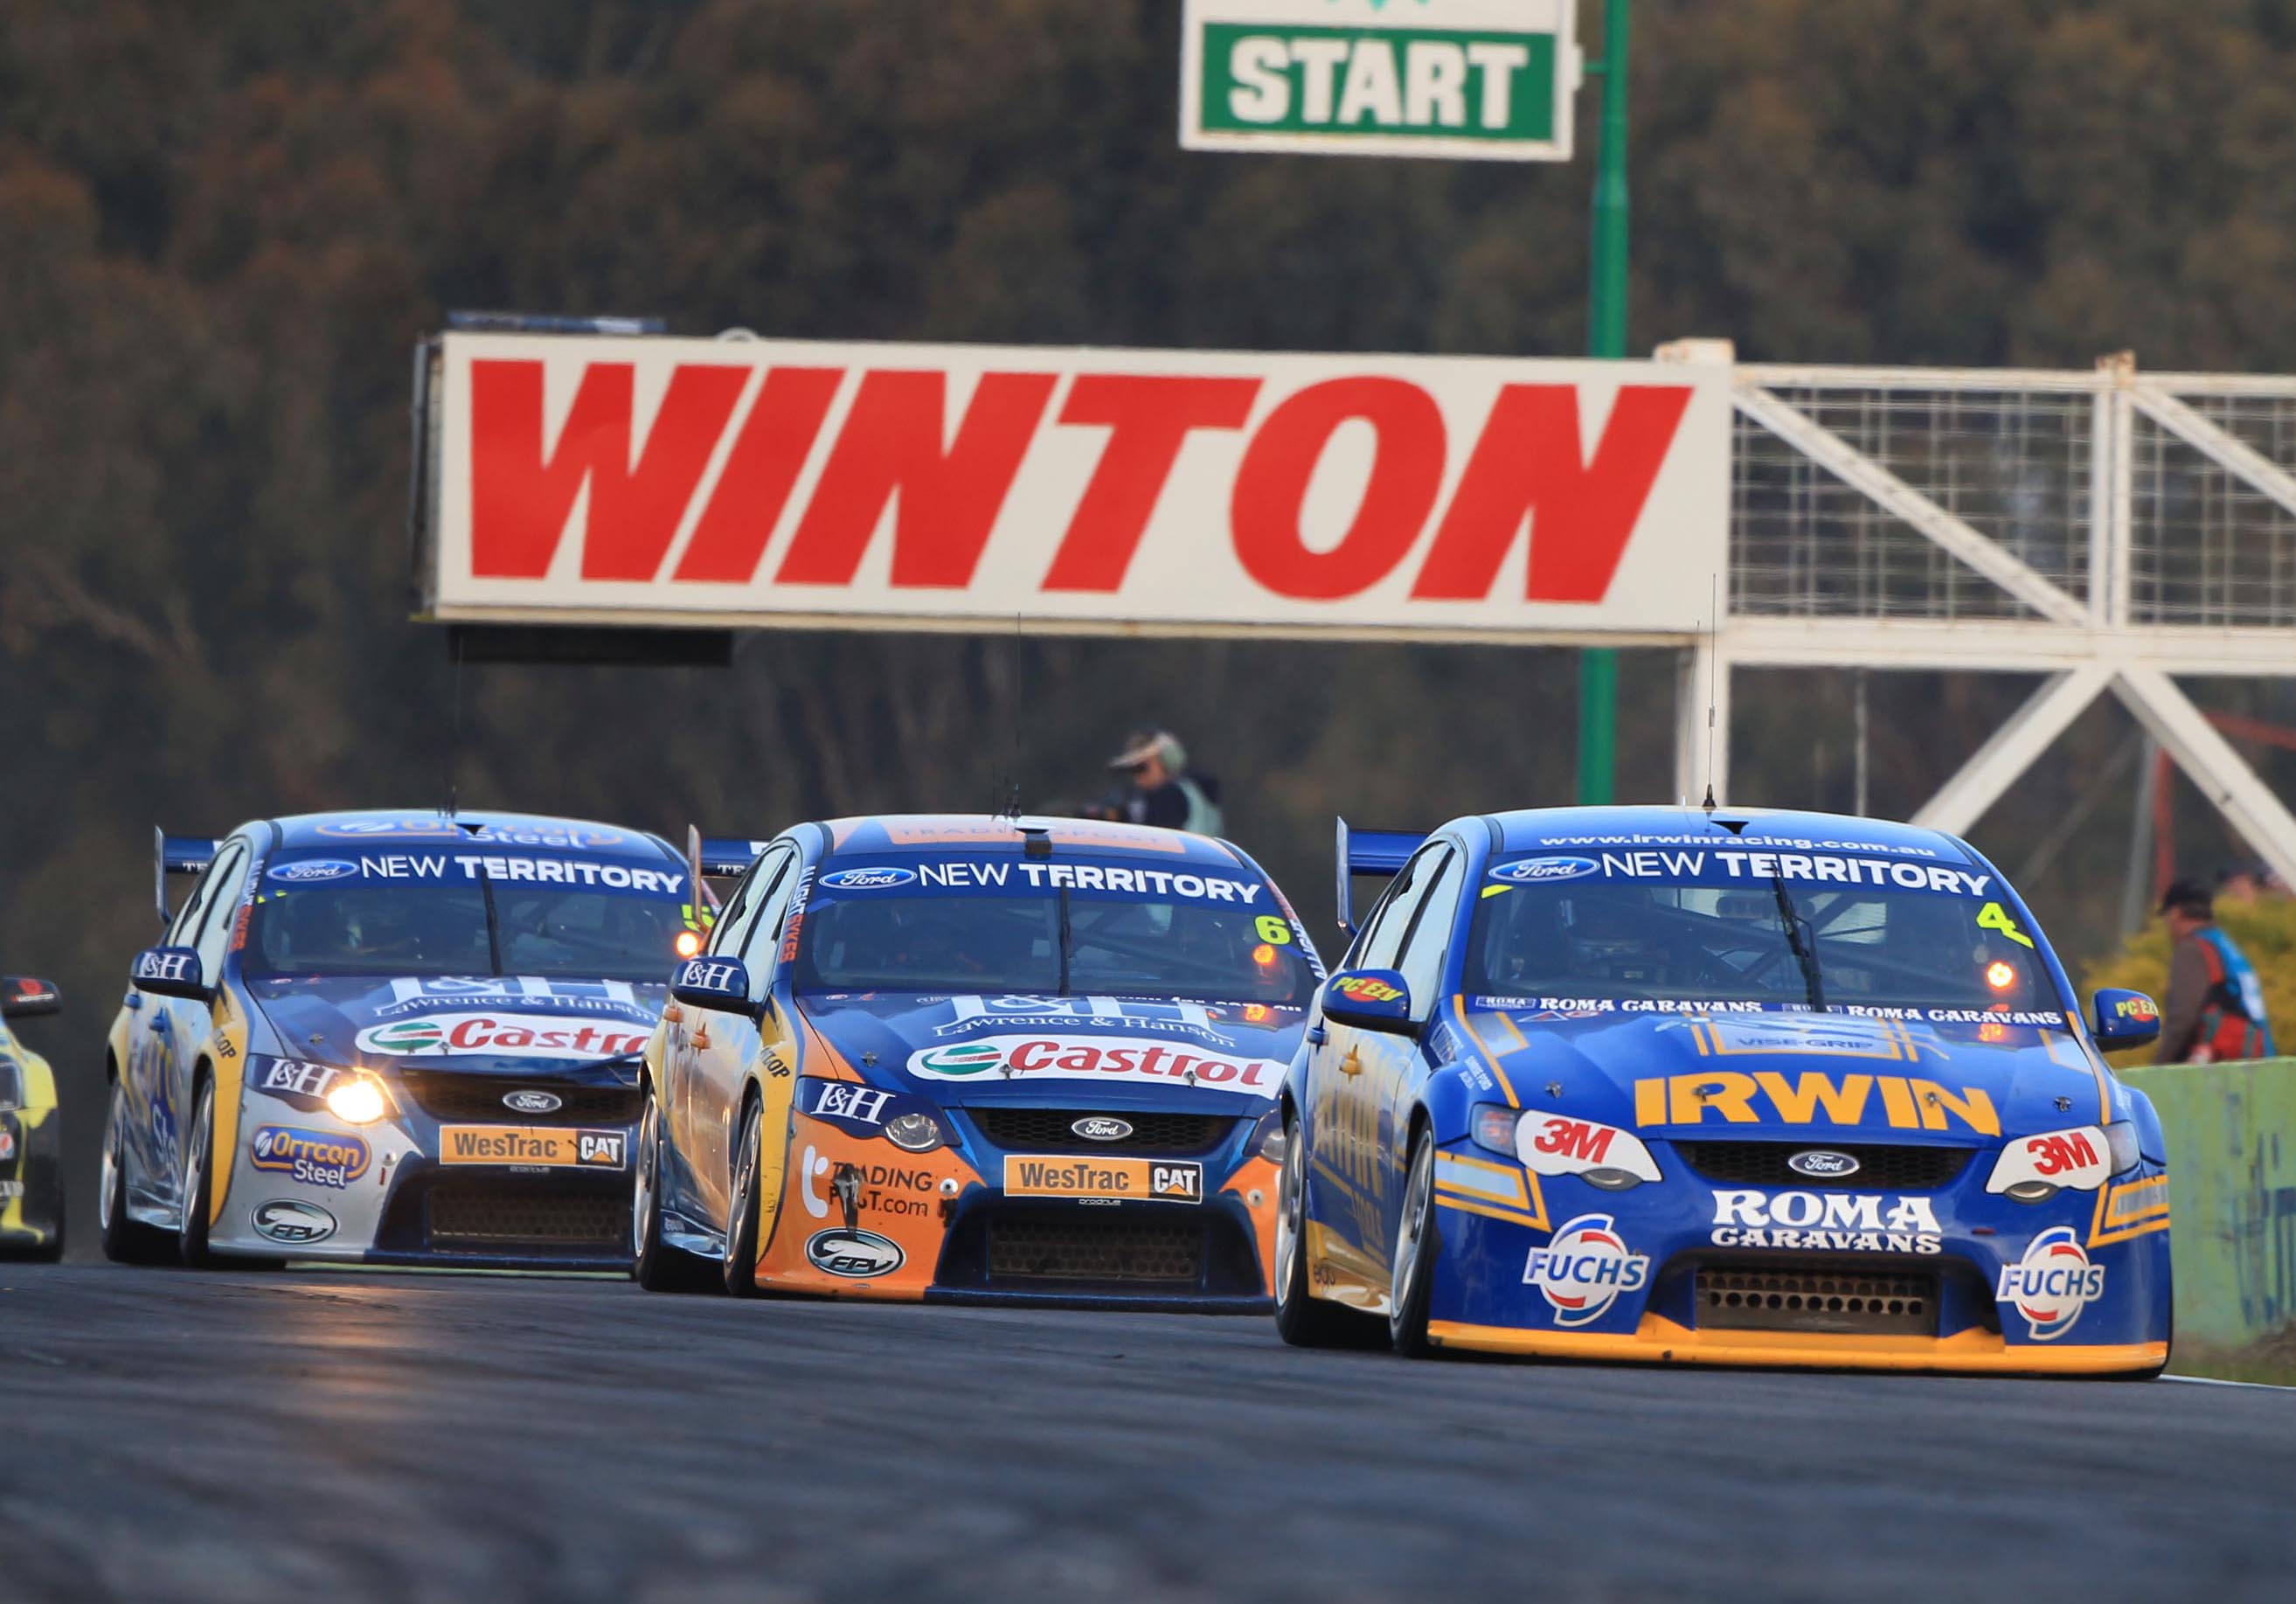 aussie, V8, Supercars, Race, Racing, V 8, Ford Wallpaper